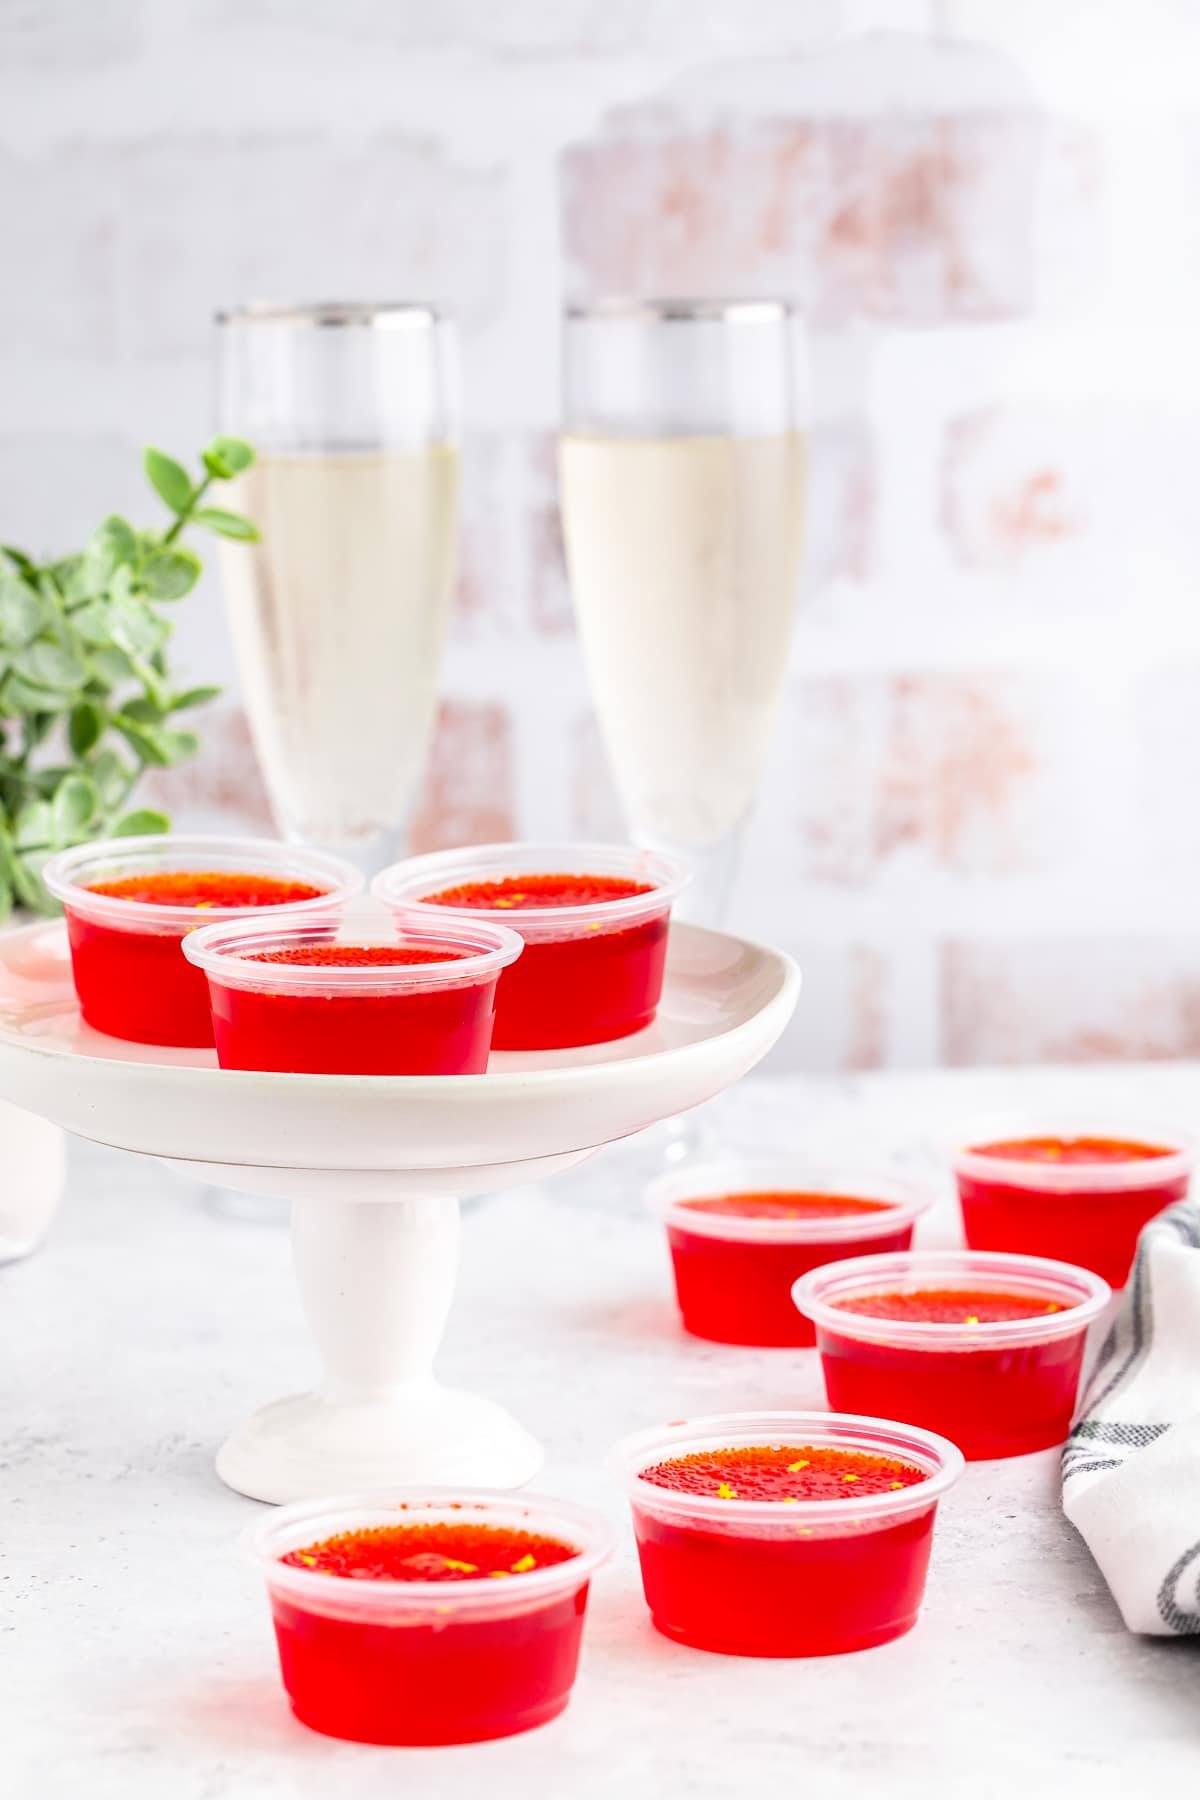 jello shots recipe on a cake stand with champagne glasses